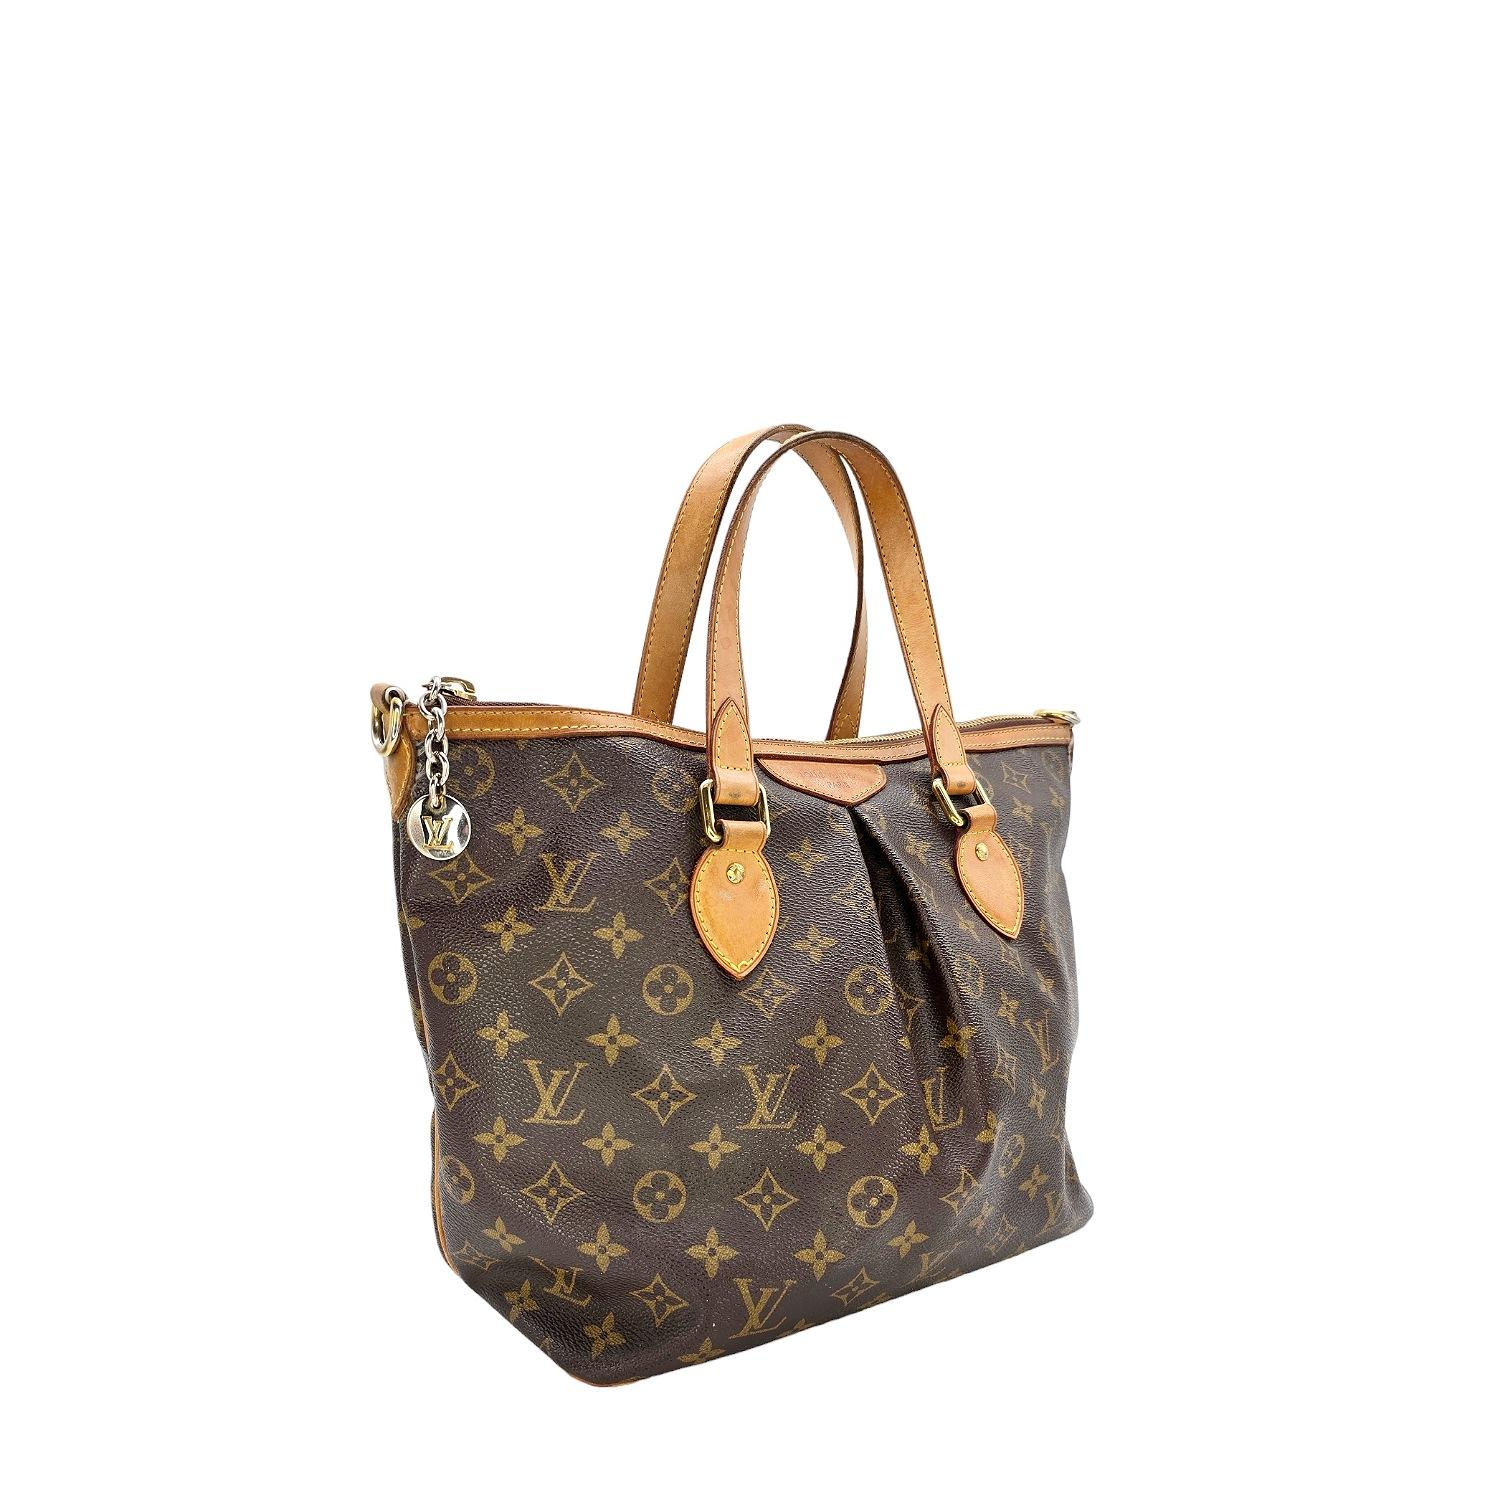 Indulge in luxury with this Louis Vuitton Vintage Monogram Canvas Tivoli PM Satchel. Crafted from the iconic monogram canvas with natural vachetta leather trim and gold-tone hardware, this tote exudes sophistication. The spacious interior and 2